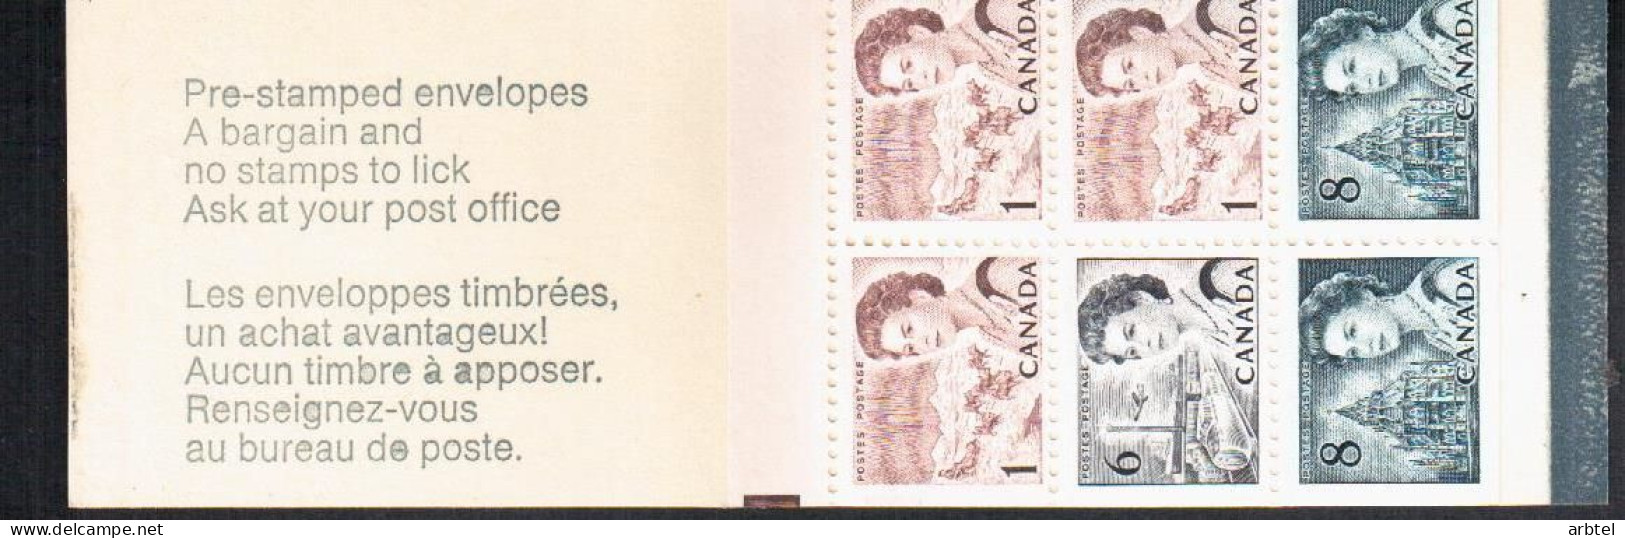 CANADA CARNET BOOKLET STAGE COACH DILIGENCIA CORREO 1820 - Diligences